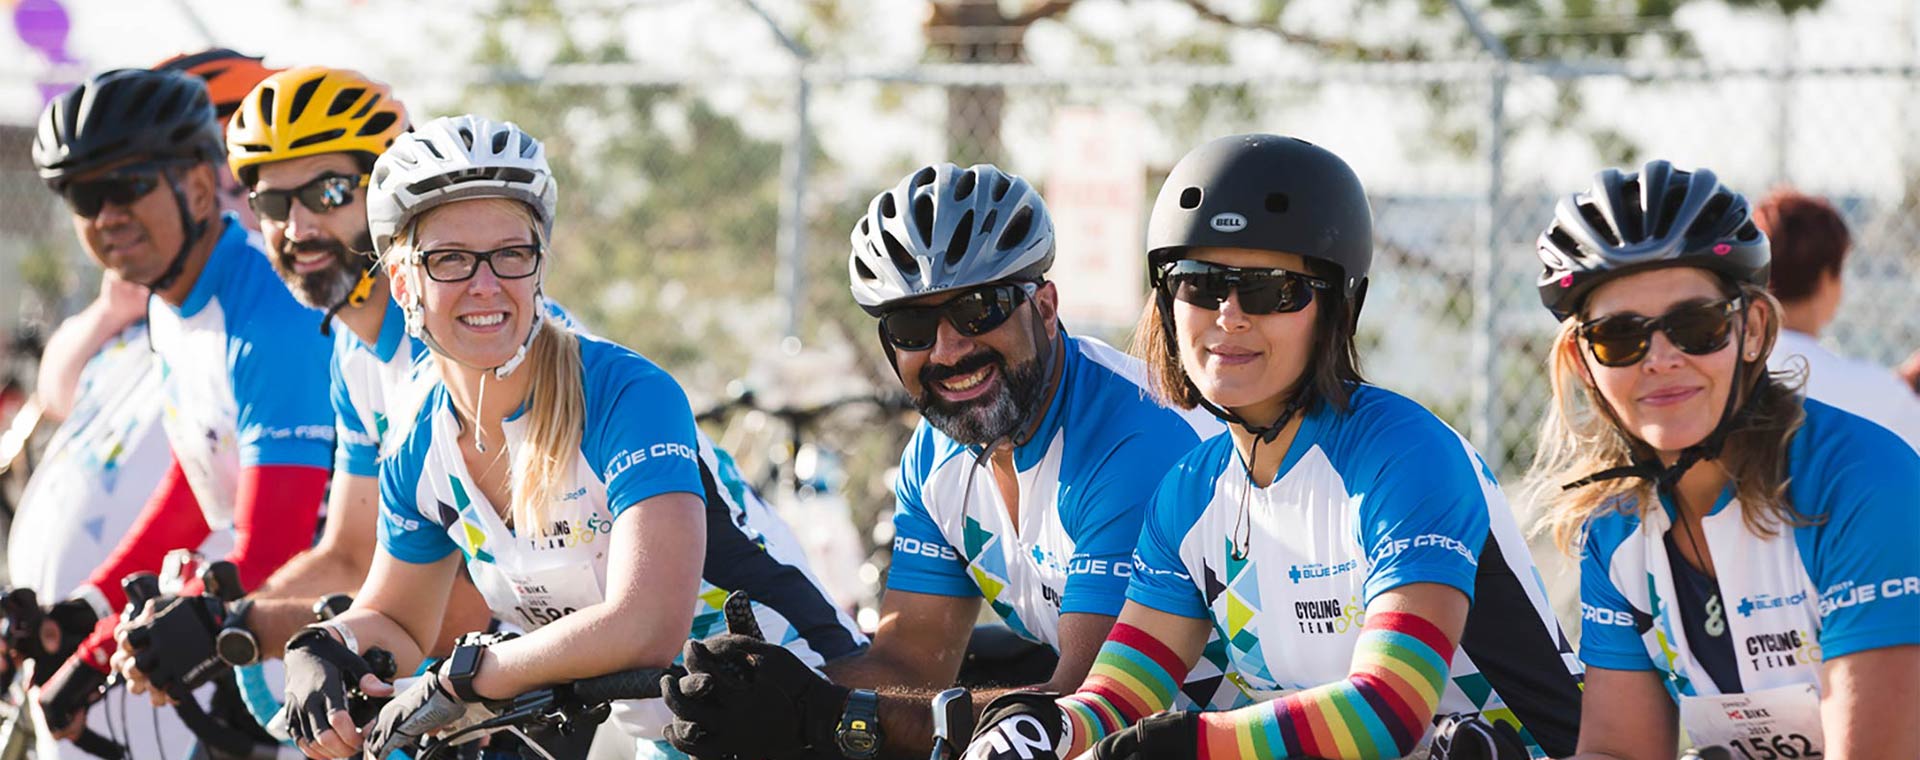 Group of six Alberta Blue Cross employees in matching race tops are leaning against the front handle bars of their bicycles in preparation for a race.